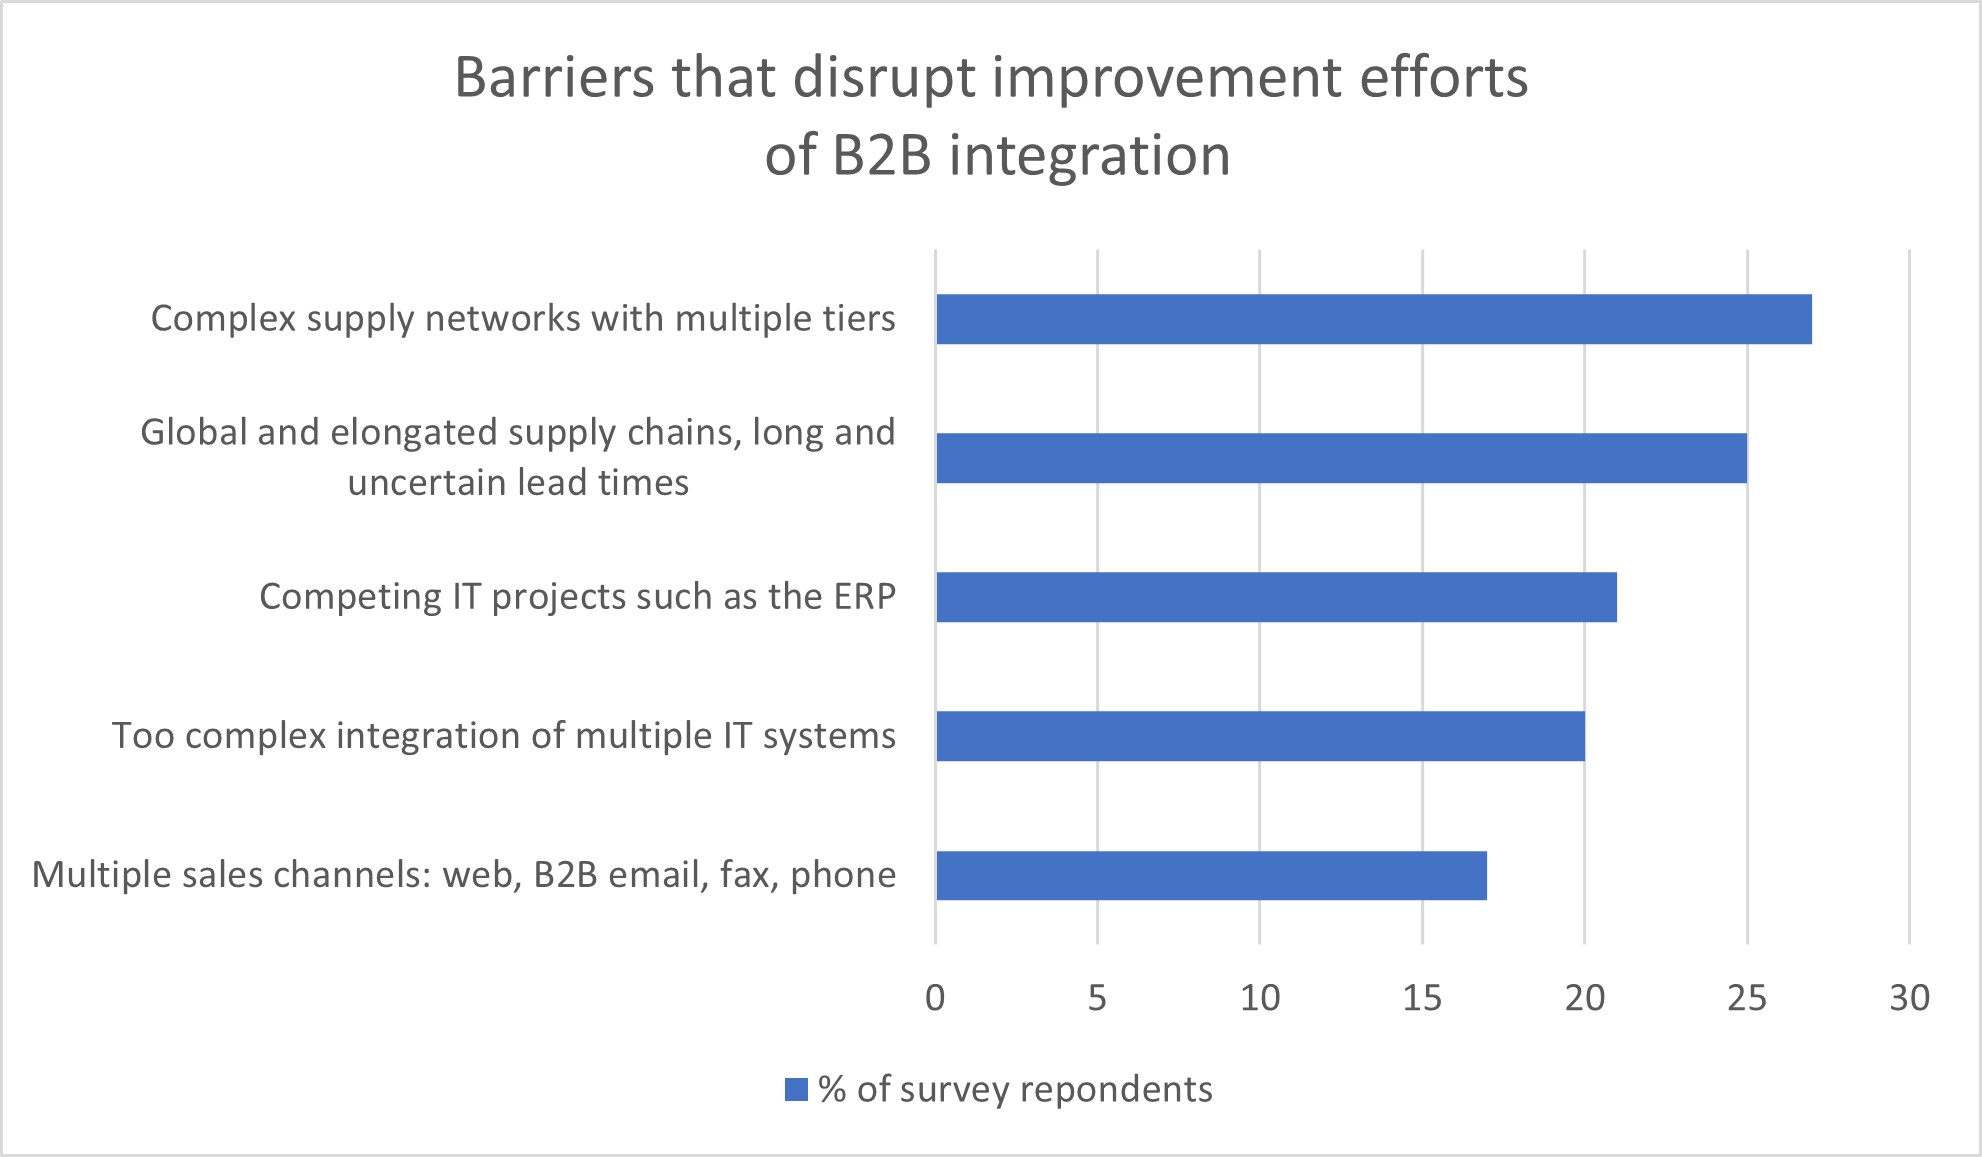 Image of survey results listing the barriers that disrupt B2B integration improvement efforts including complex supply networks and global, elongated supply chains. 